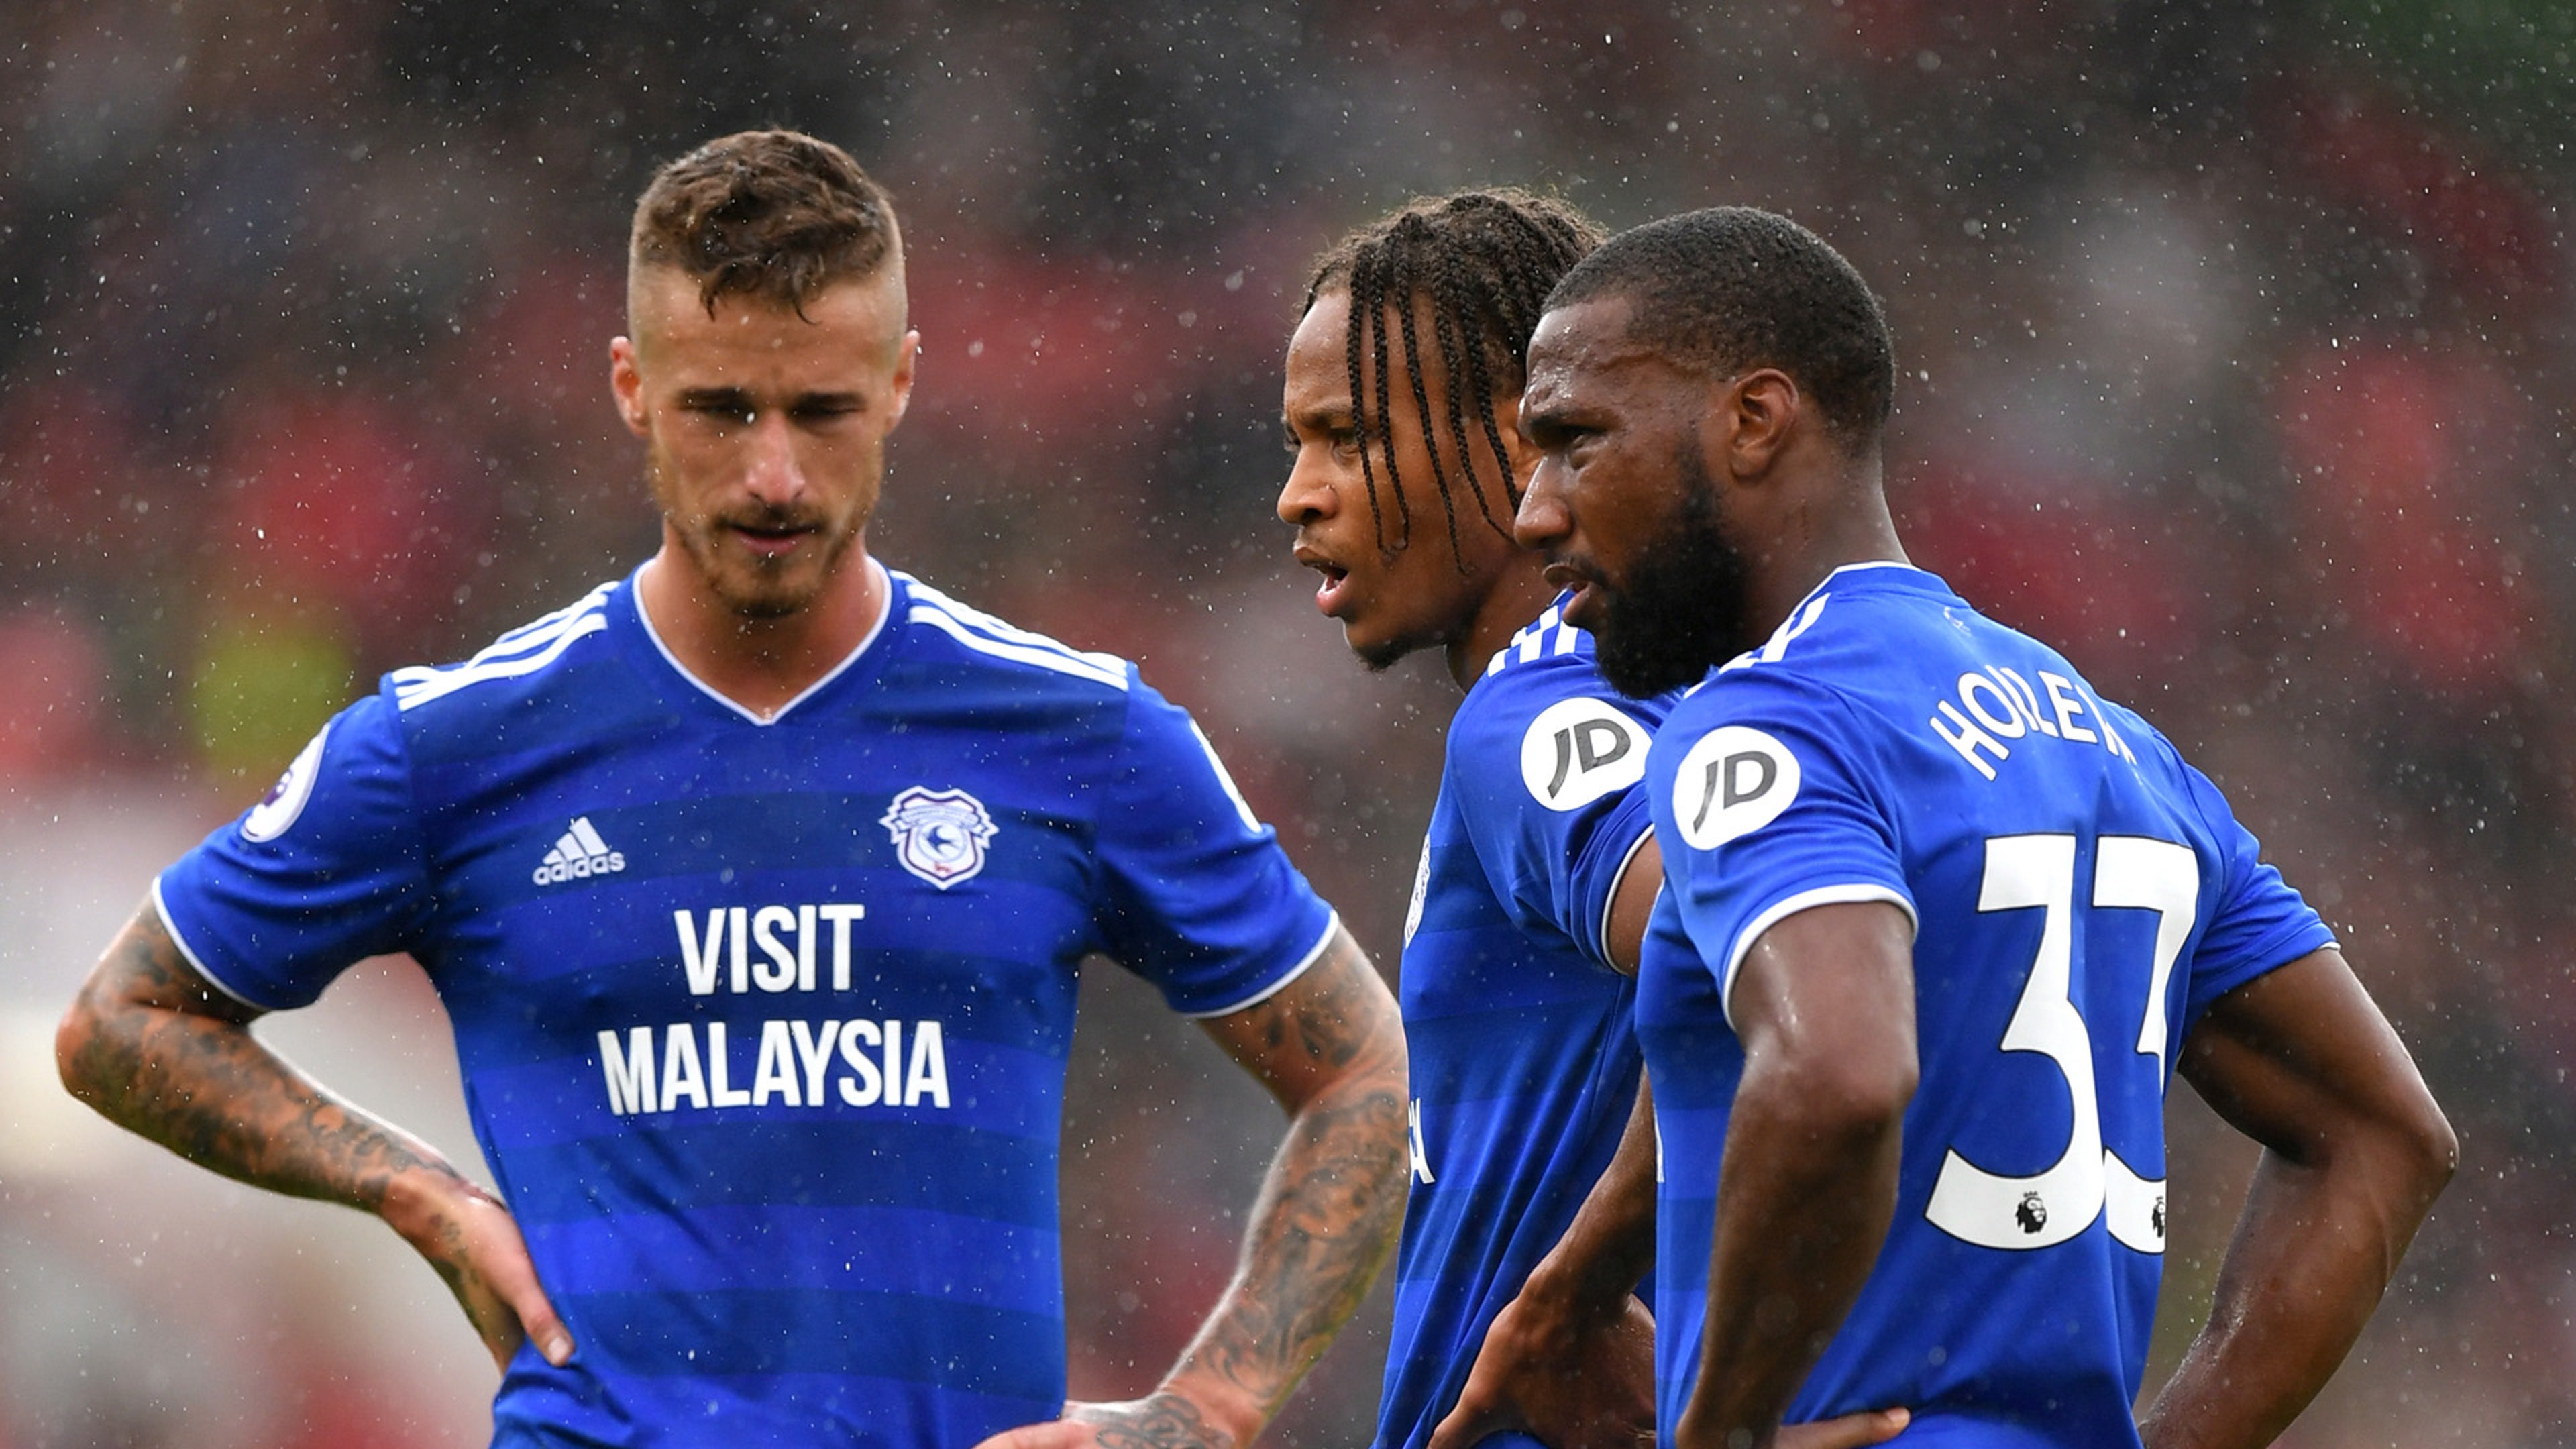 Cardiff City 2018-19 season: Fixtures, transfers, squad numbers